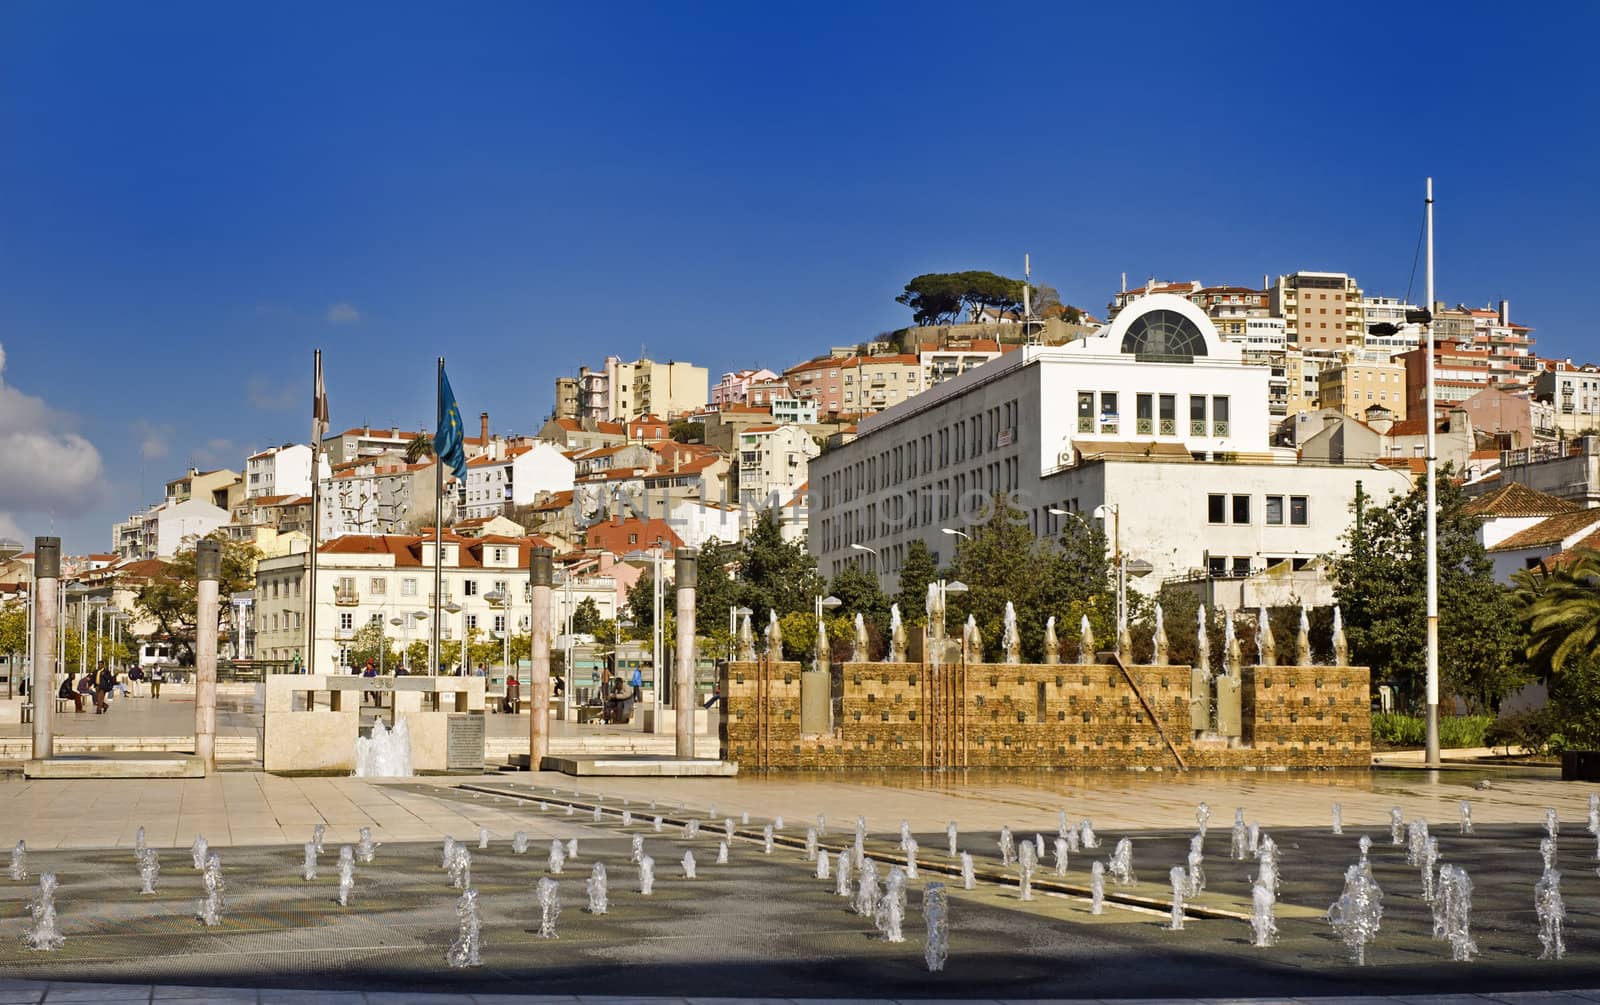 The Captial of Portugal - Lisbon